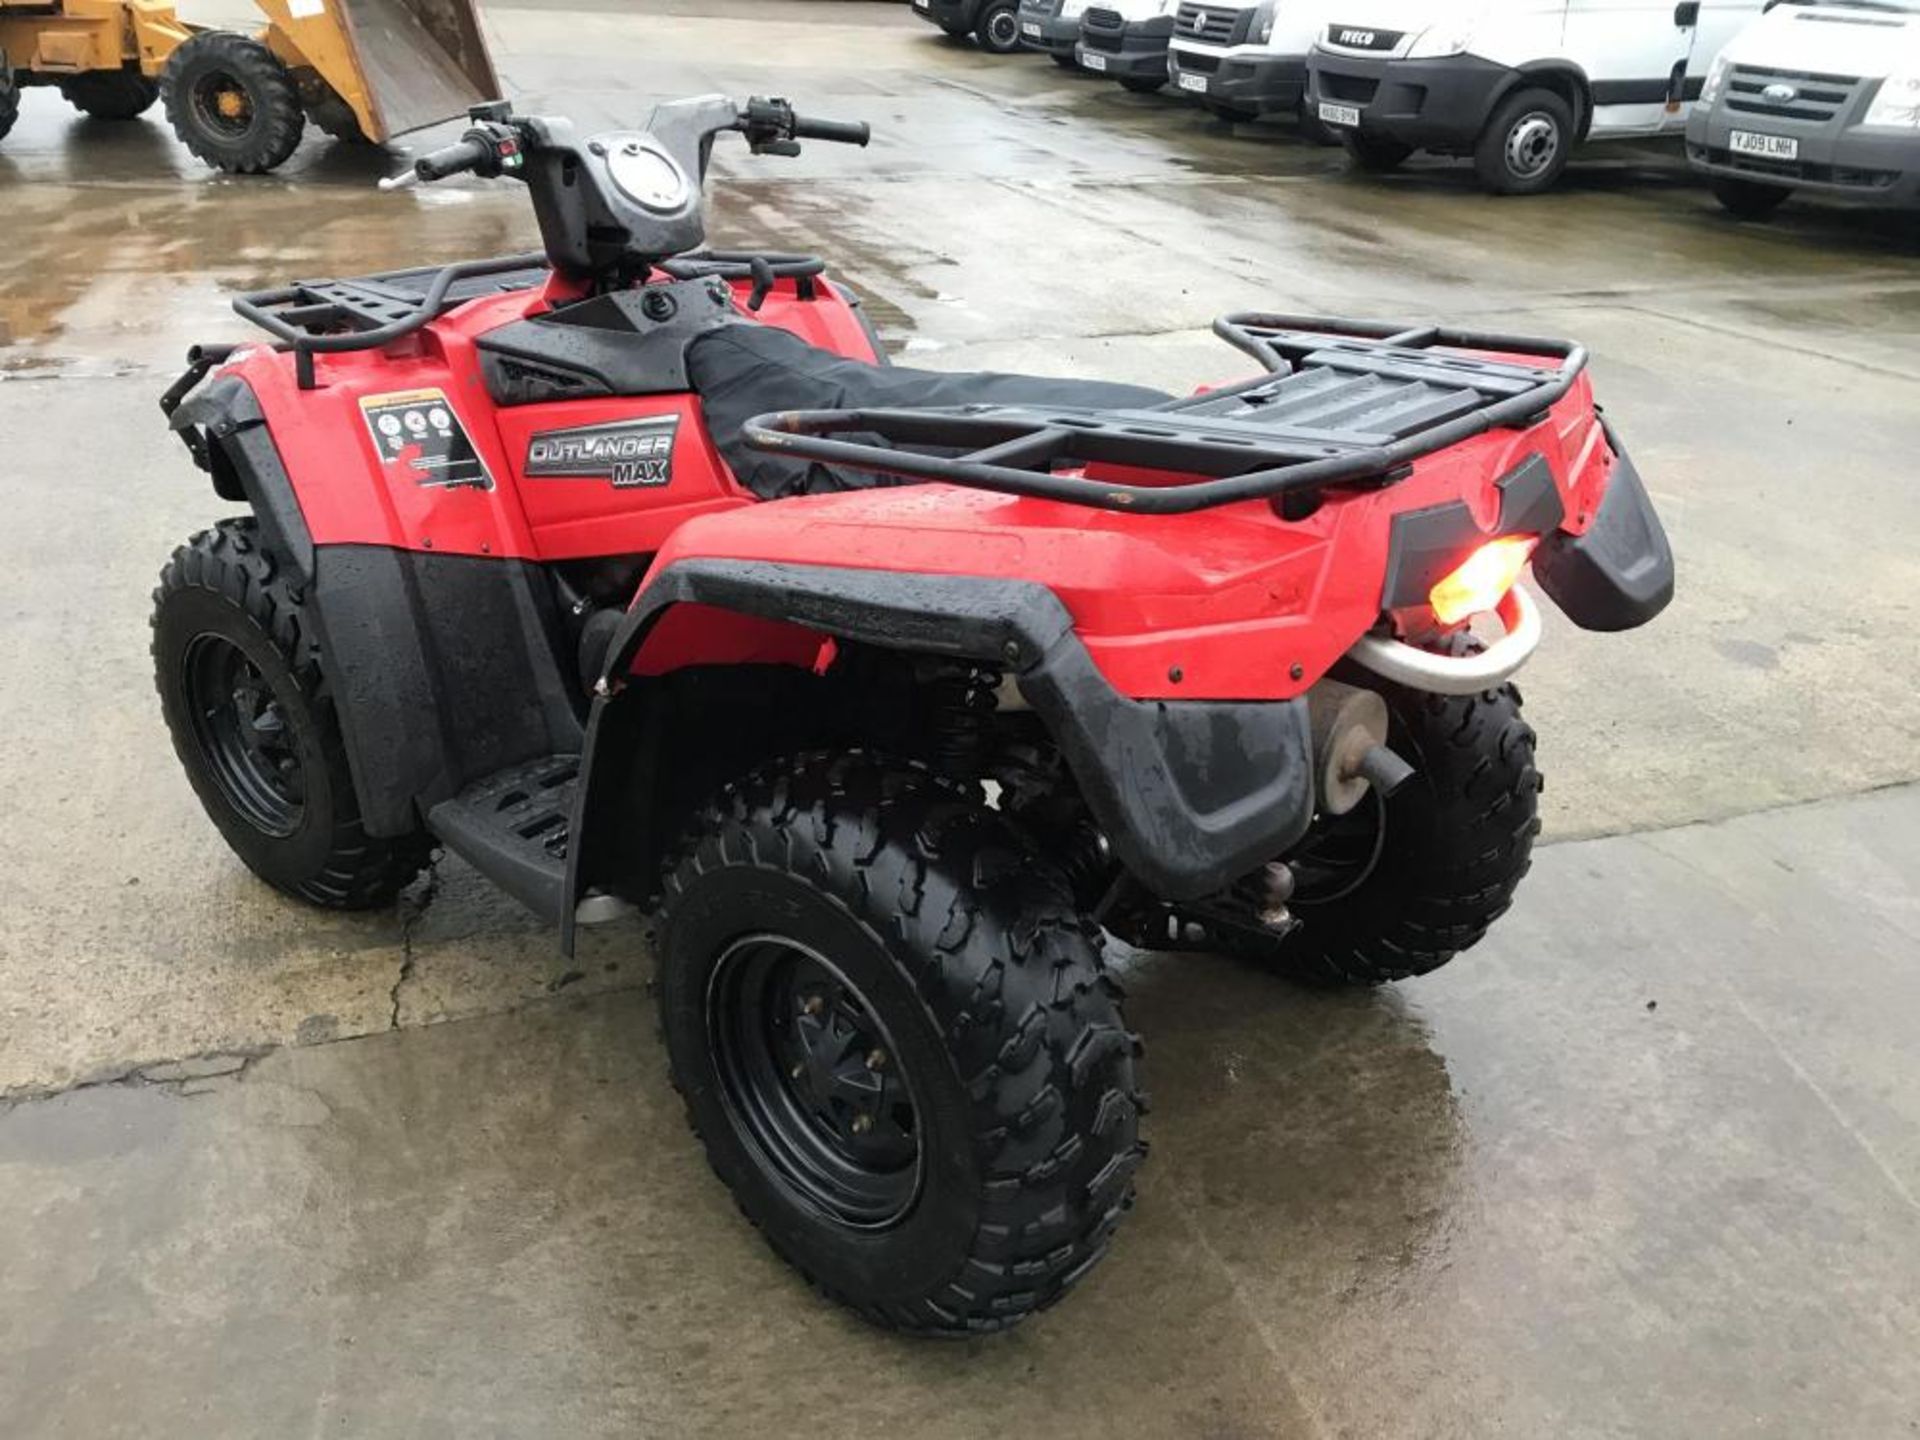 2013 CAN-AM 400 QUAD BIKE, RUNS, WORKS AND DRIVES *PLUS VAT* - Image 8 of 10